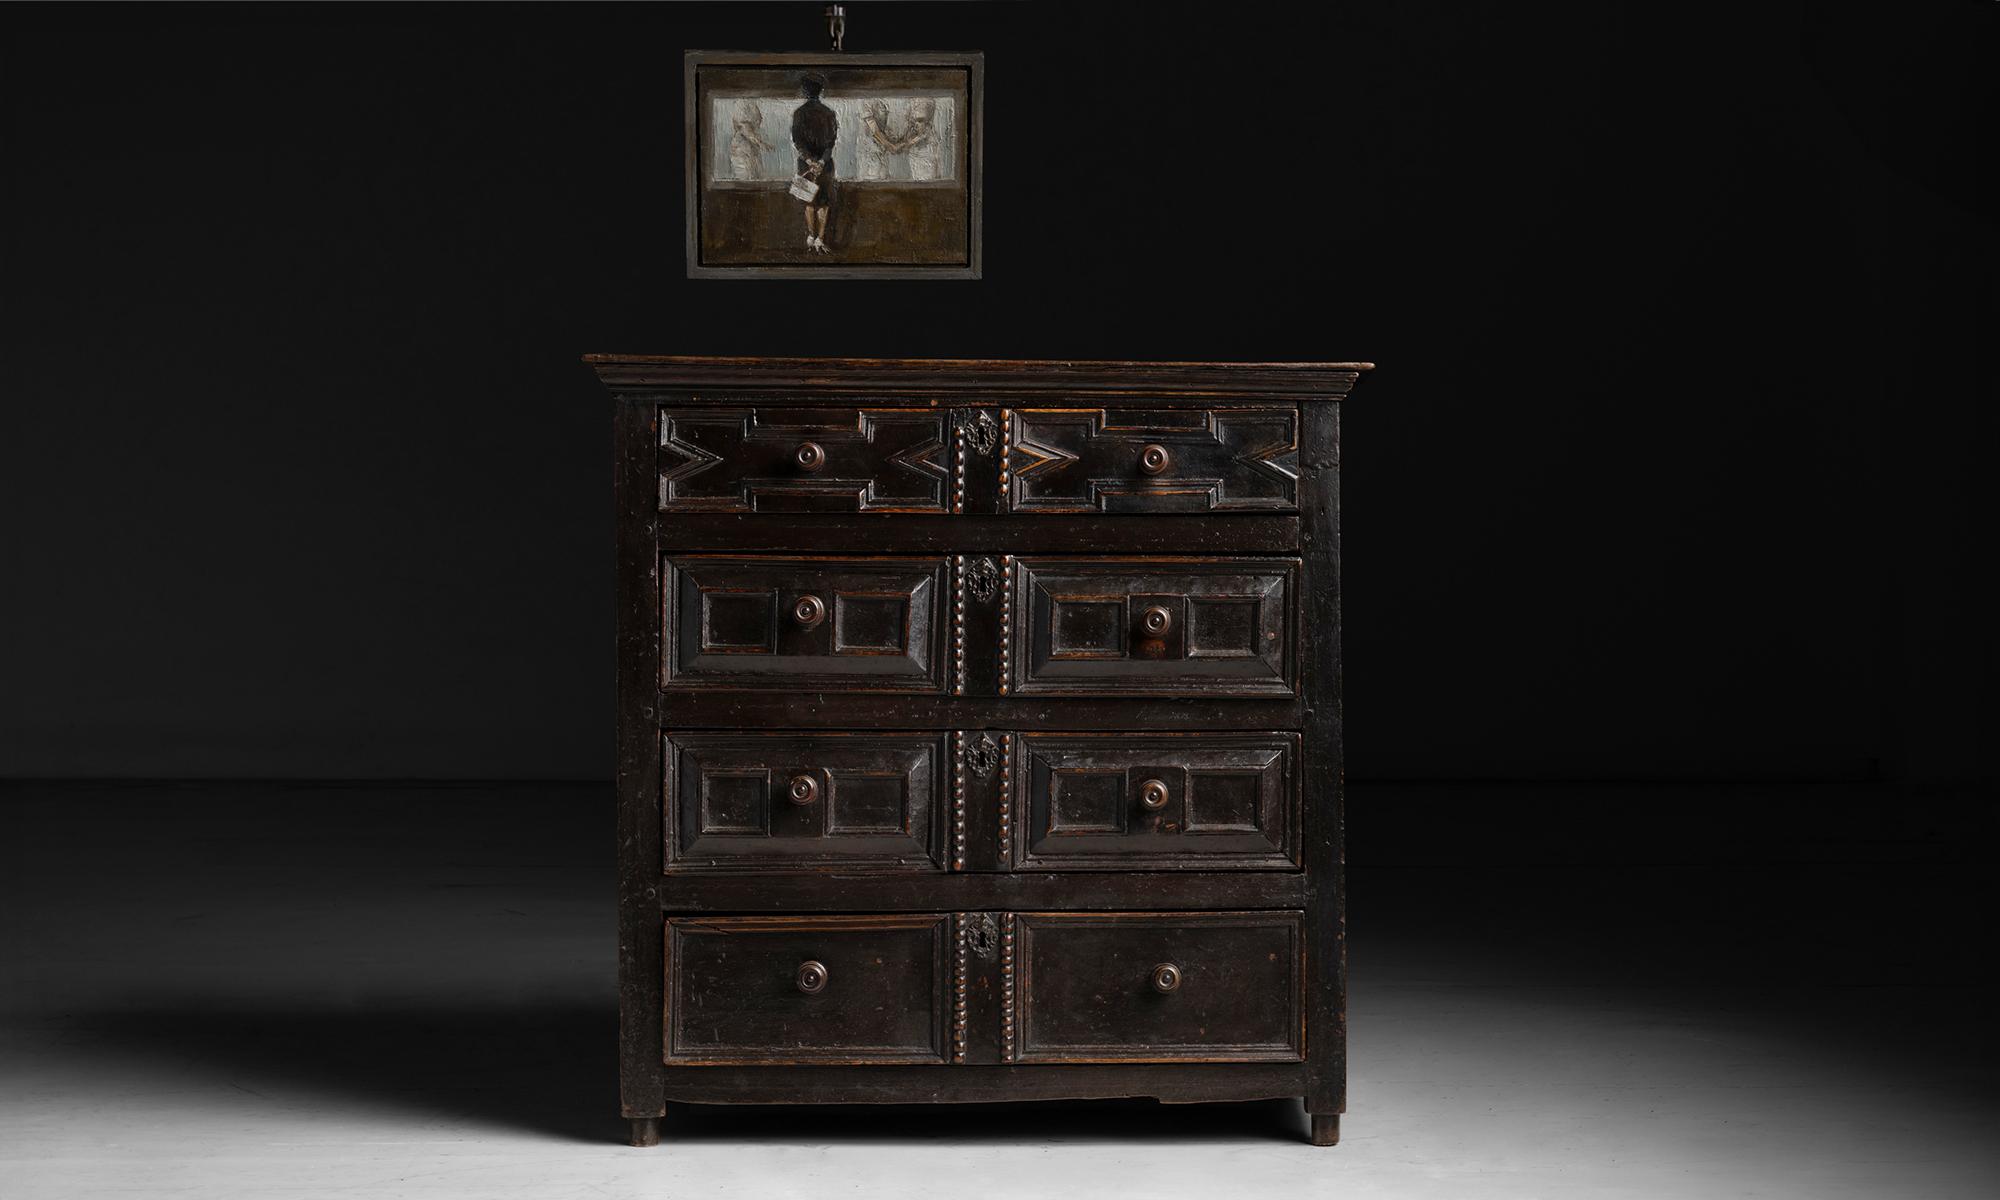 Geometric Oak Chest

England circa 1690

North country chest in original paint.

39.25